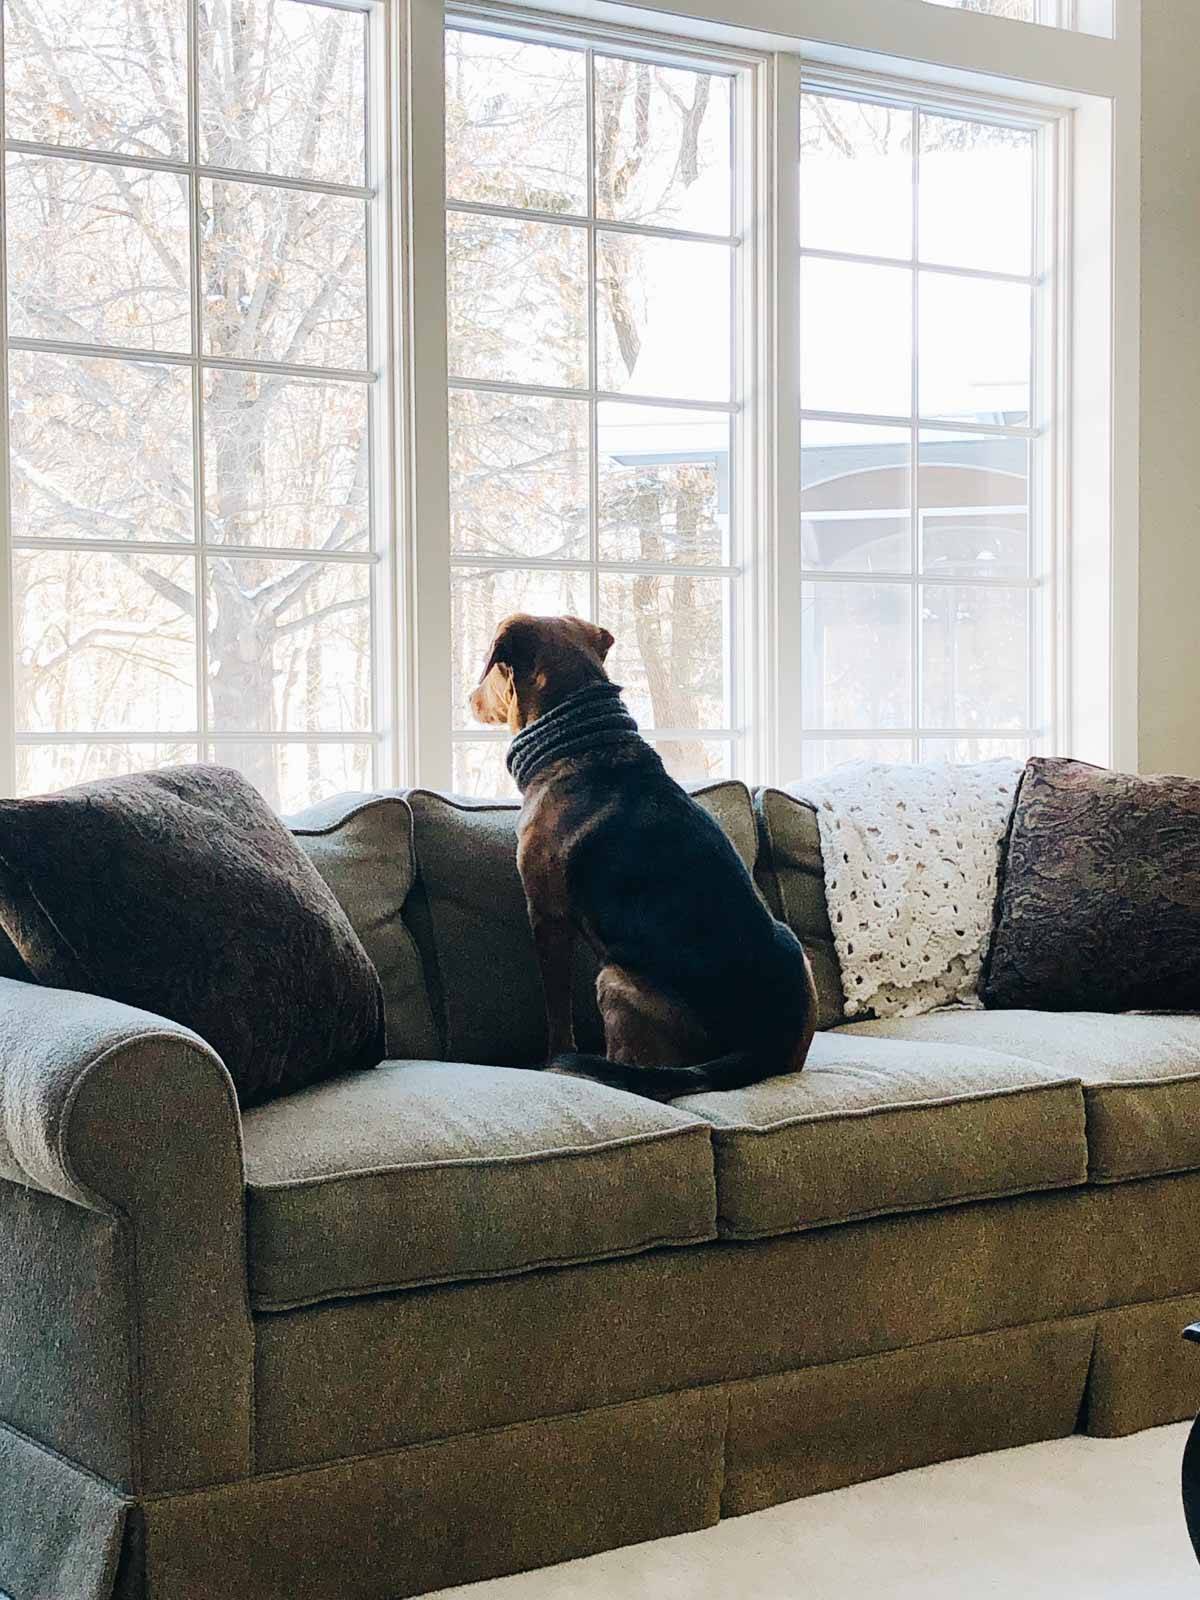 A dog sitting on a couch looking out the window.